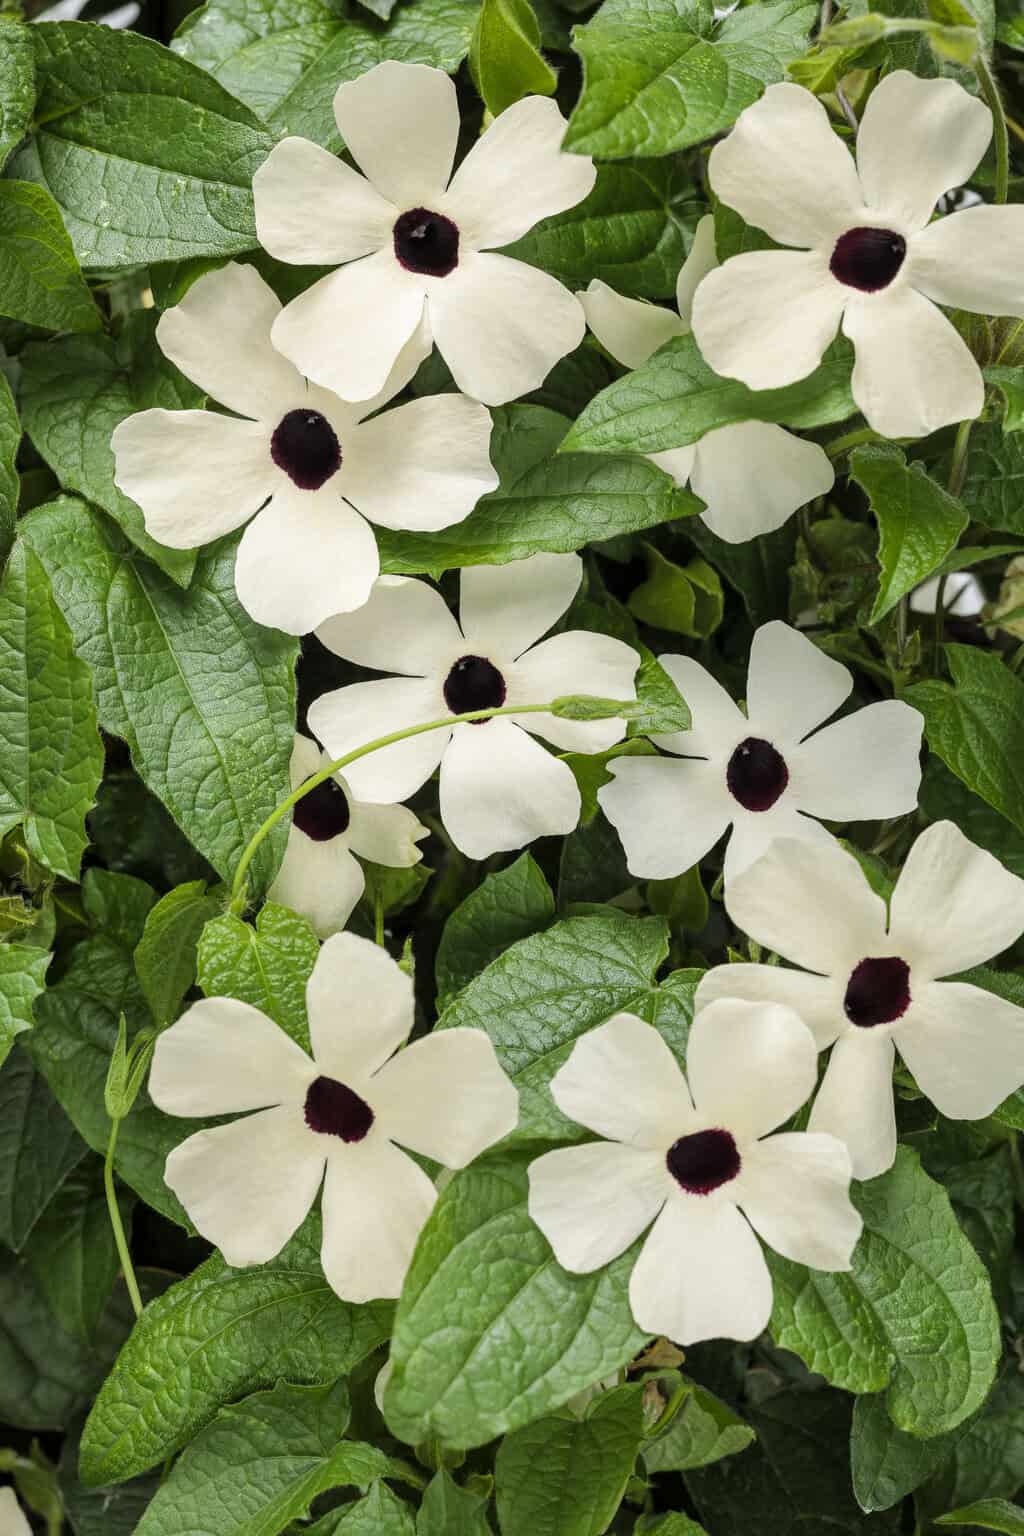 A cluster of white thunbergia with dark centers surrounded by lush green foliage. In a charming garden style, the blooms feature five petals each, creating a striking contrast against the deep, textured leaves. The flowers are evenly spread throughout the plant, adding to the overall beauty of the scene.